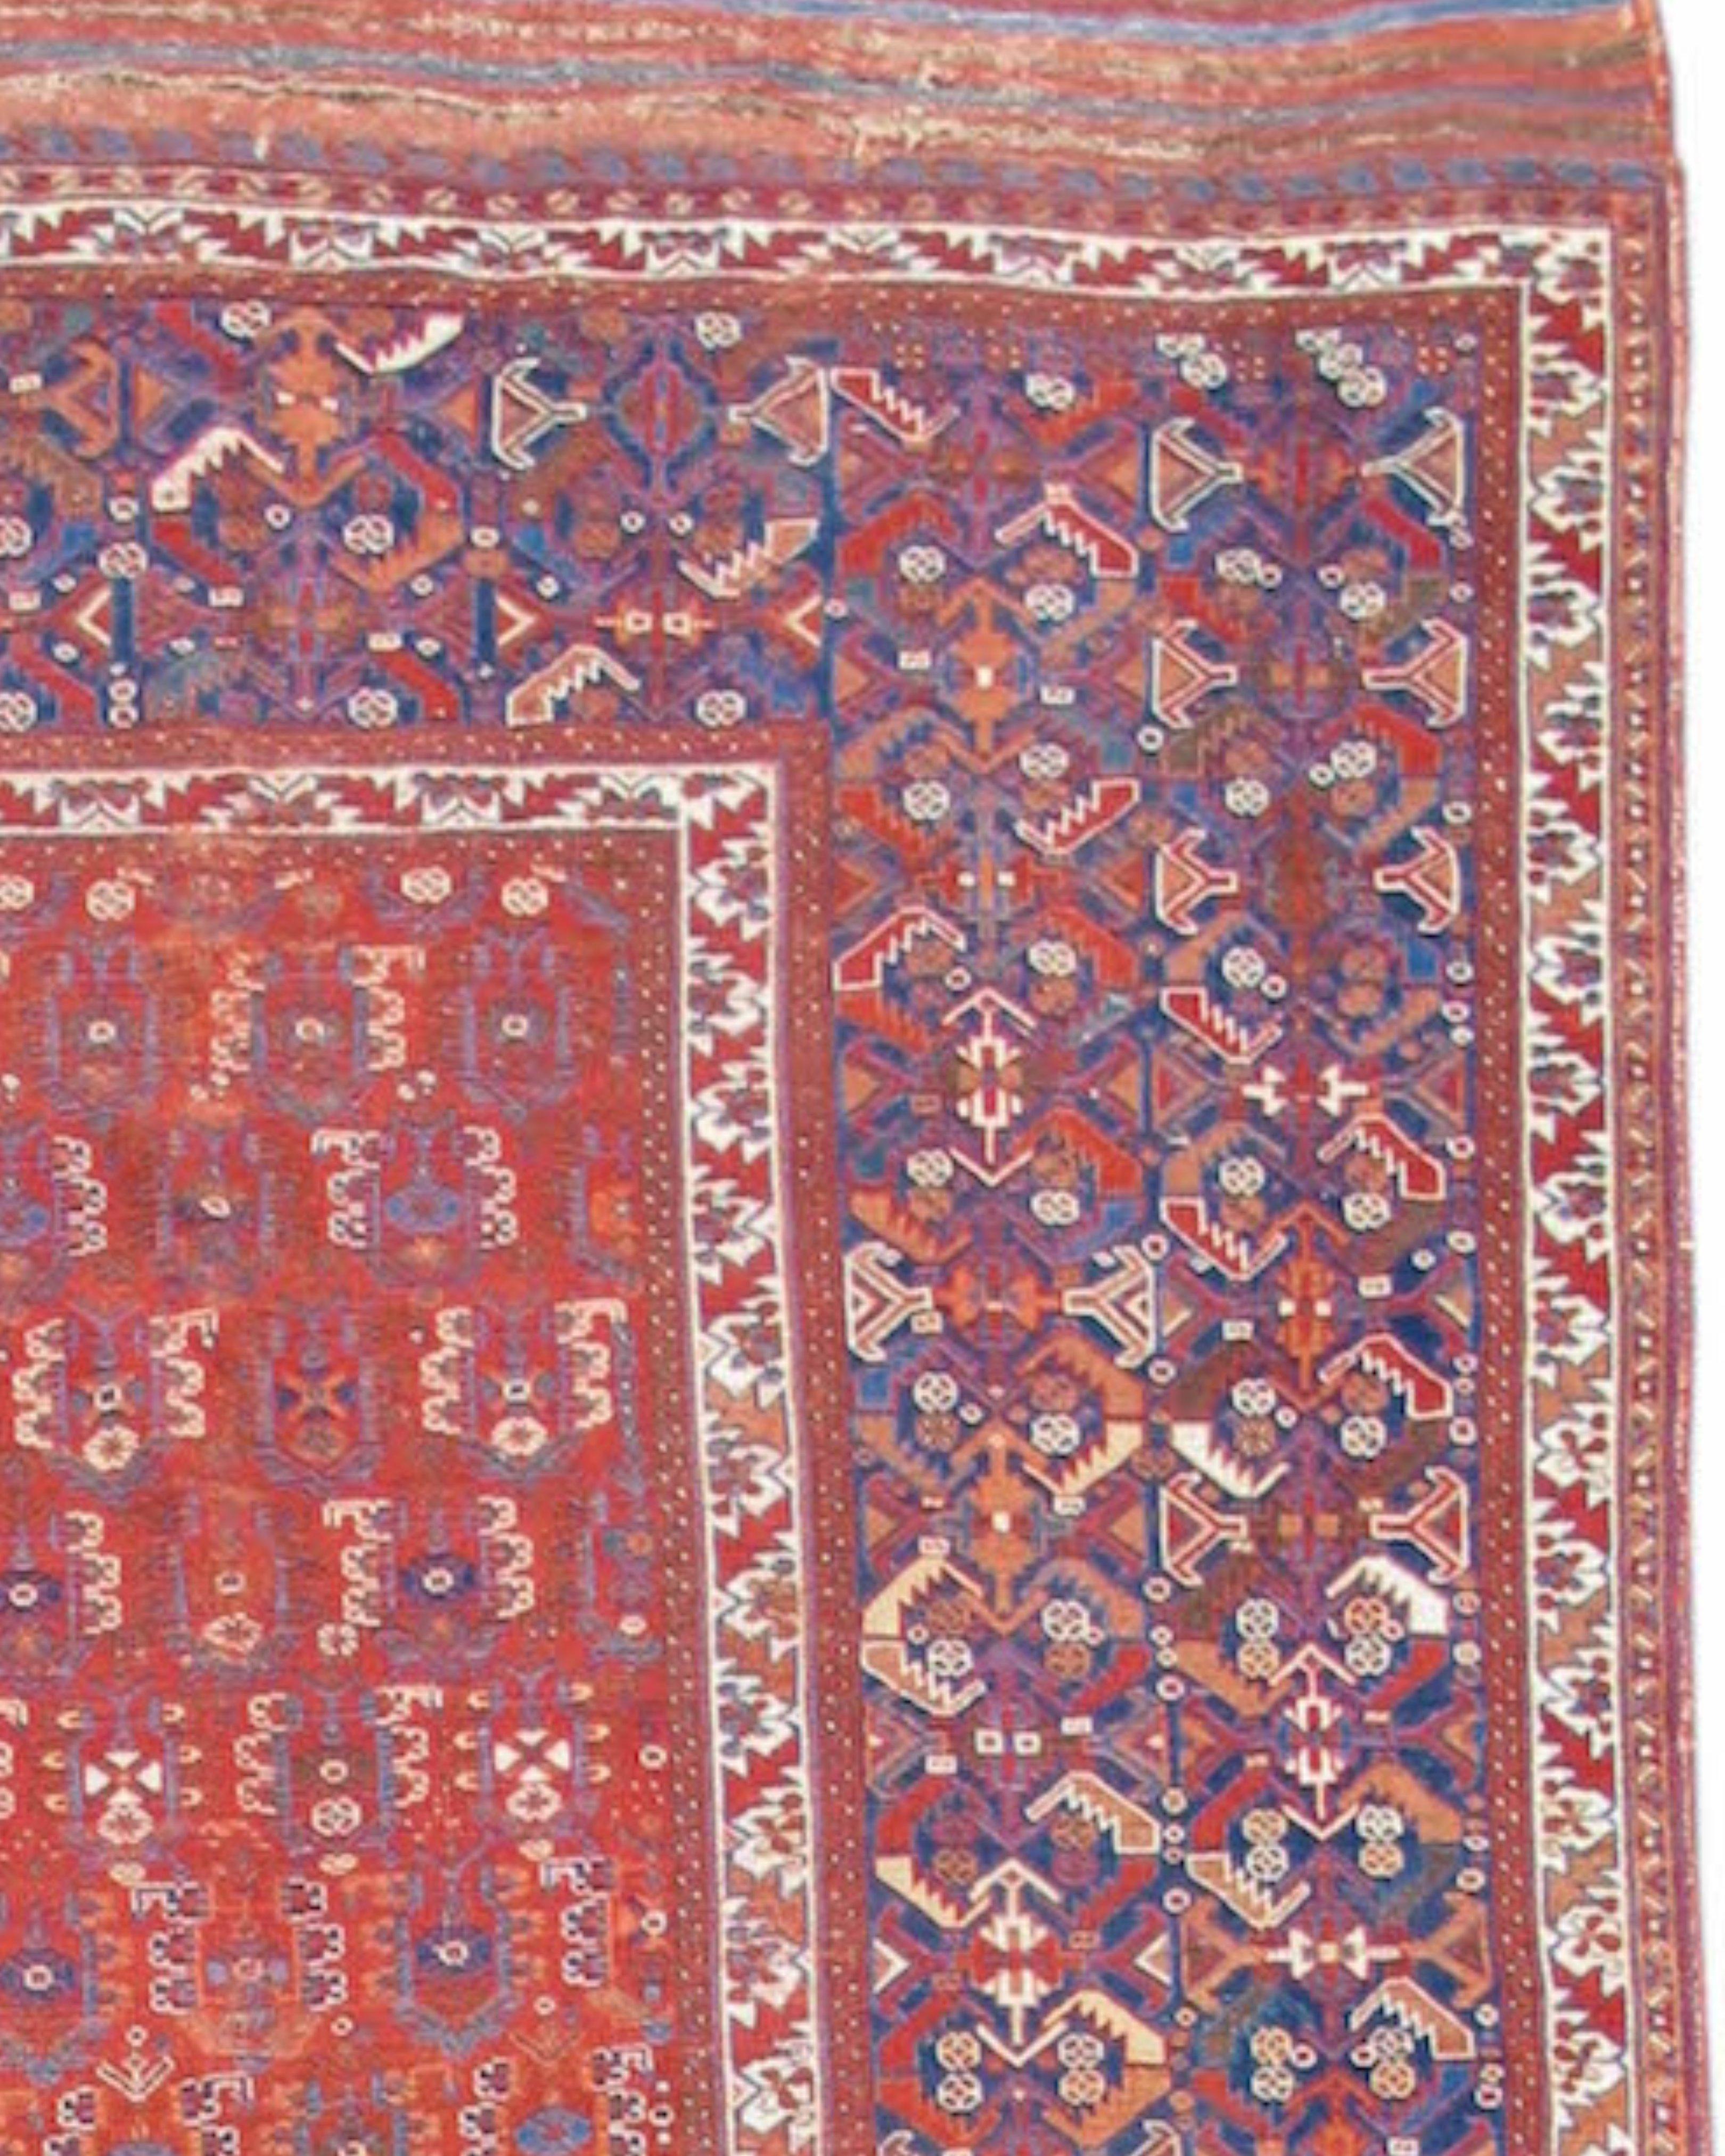 Antique Persian Afshar Triclinnium Rug, Late 19th Century

Woven with the precision and fineness of a giant bag face, this is a rare example of an Afshar main carpet and an even rarer Persian tribal attempt at a triclinium carpet. Triclinium pieces